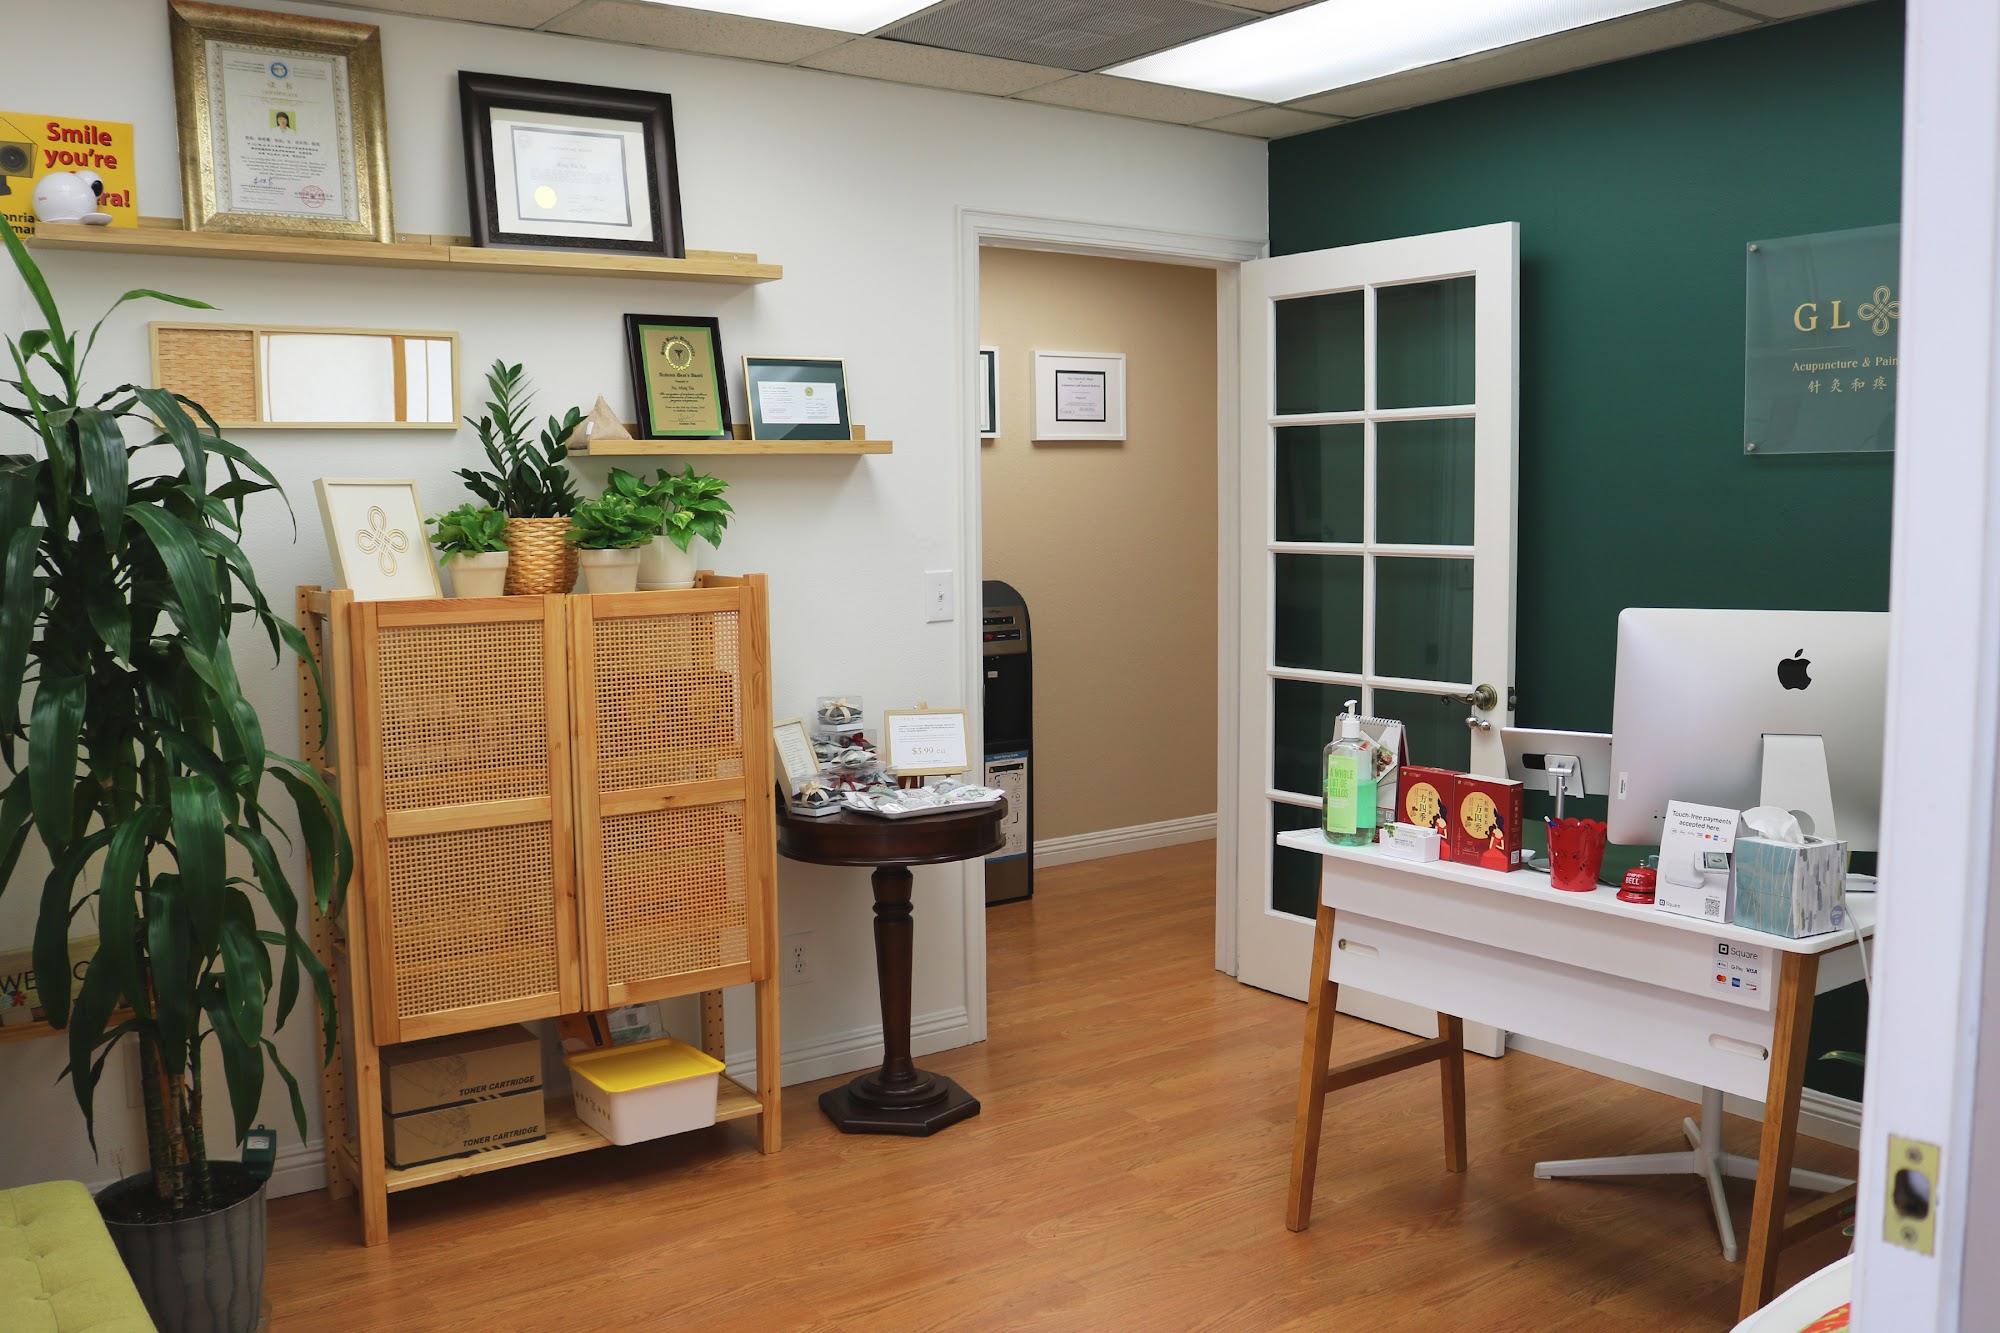 Glory Acupuncture & Pain Management Clinic